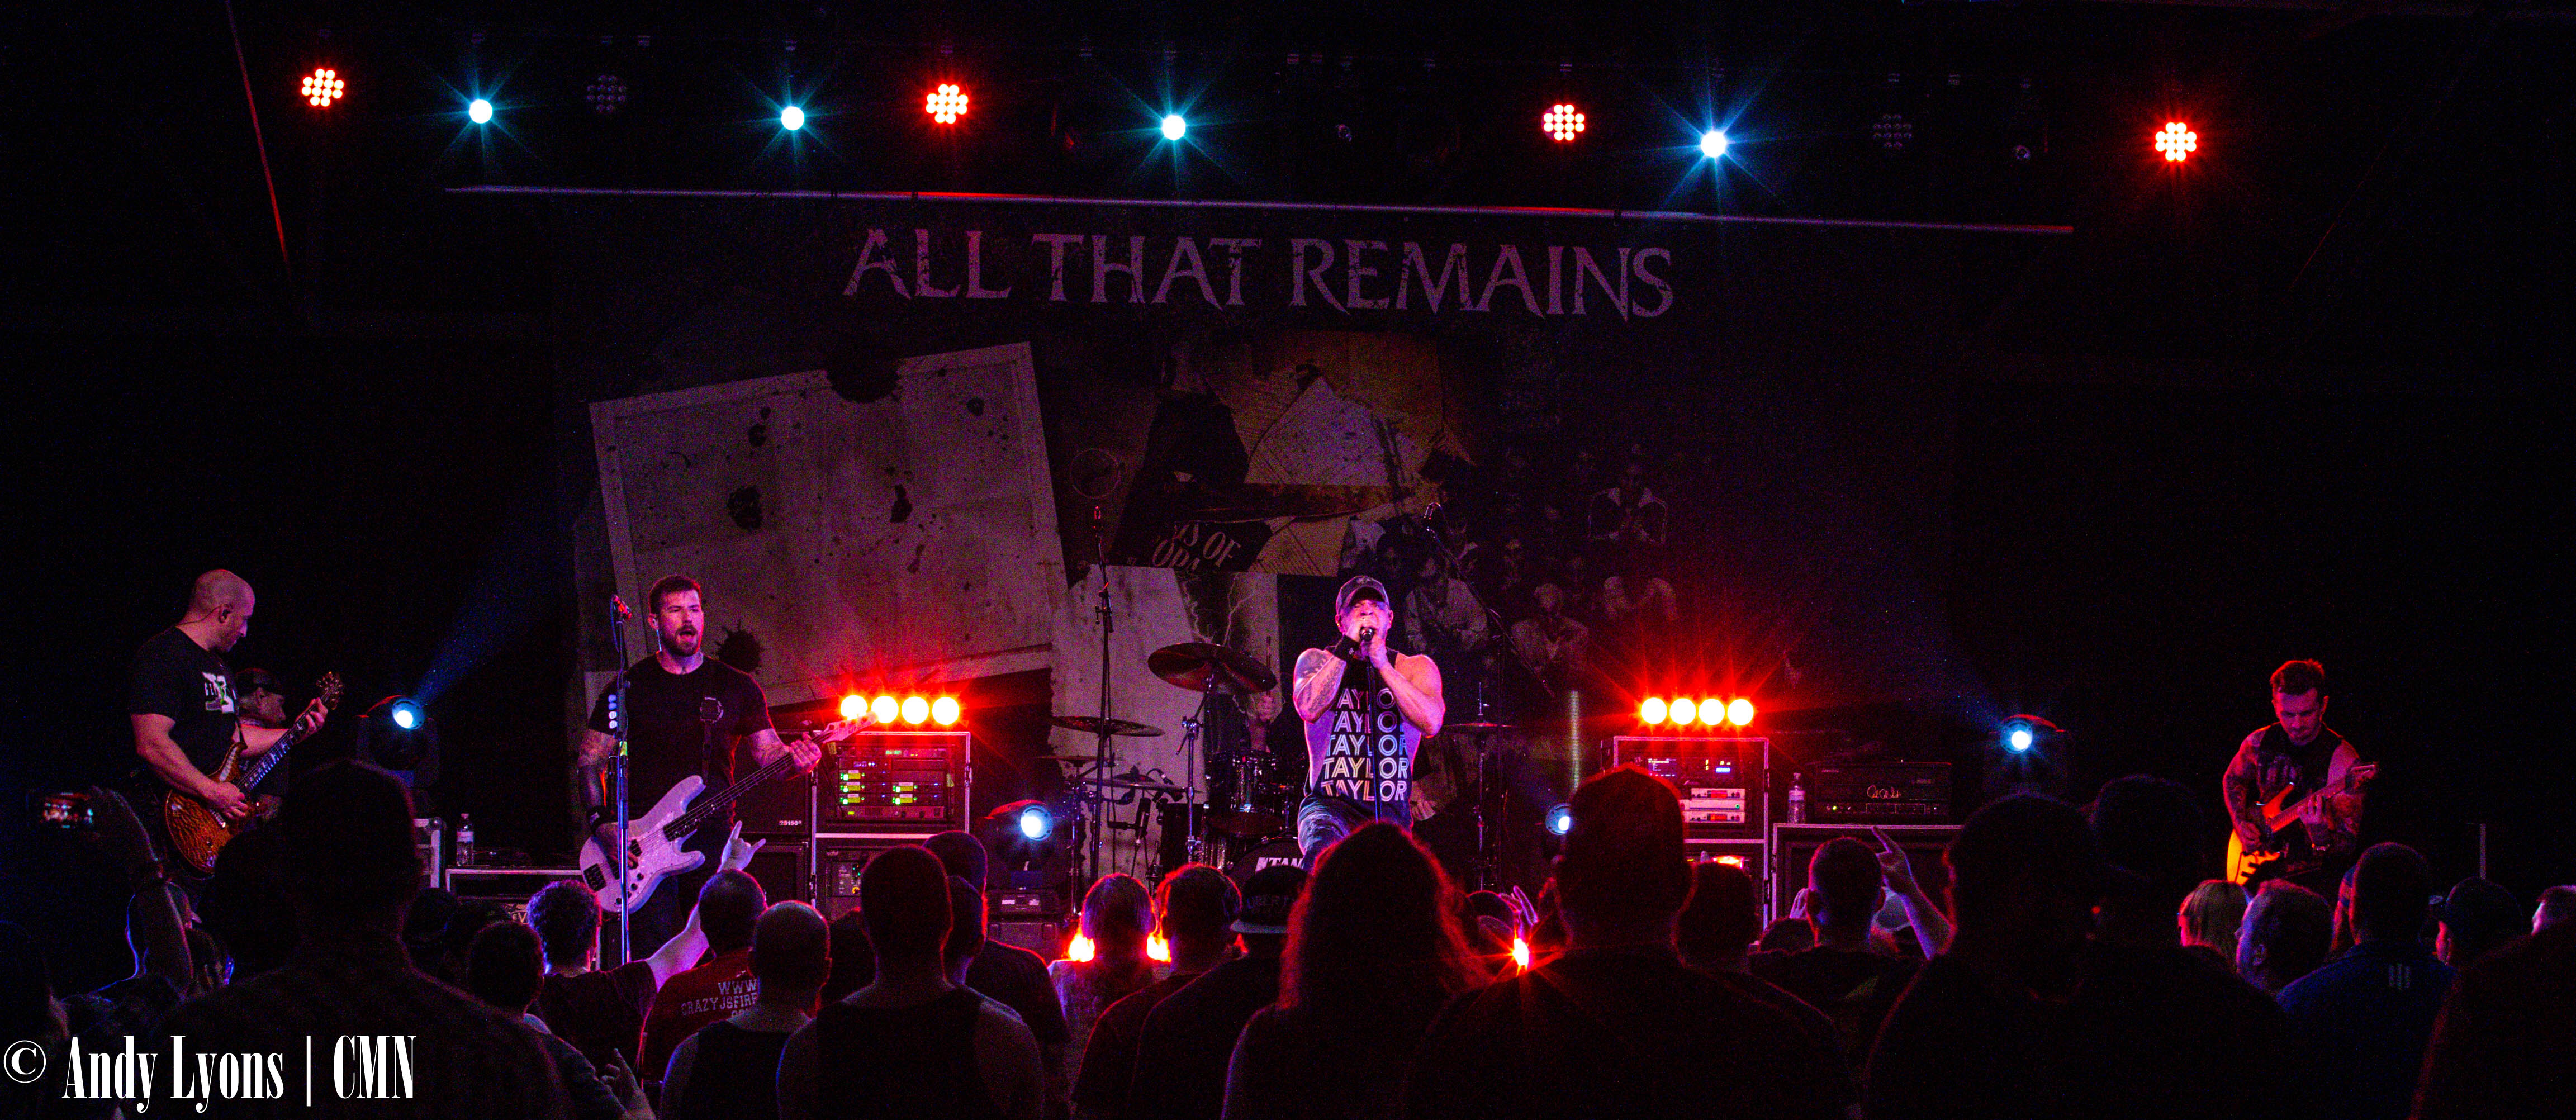 Small crowd still means big show from All That Remains